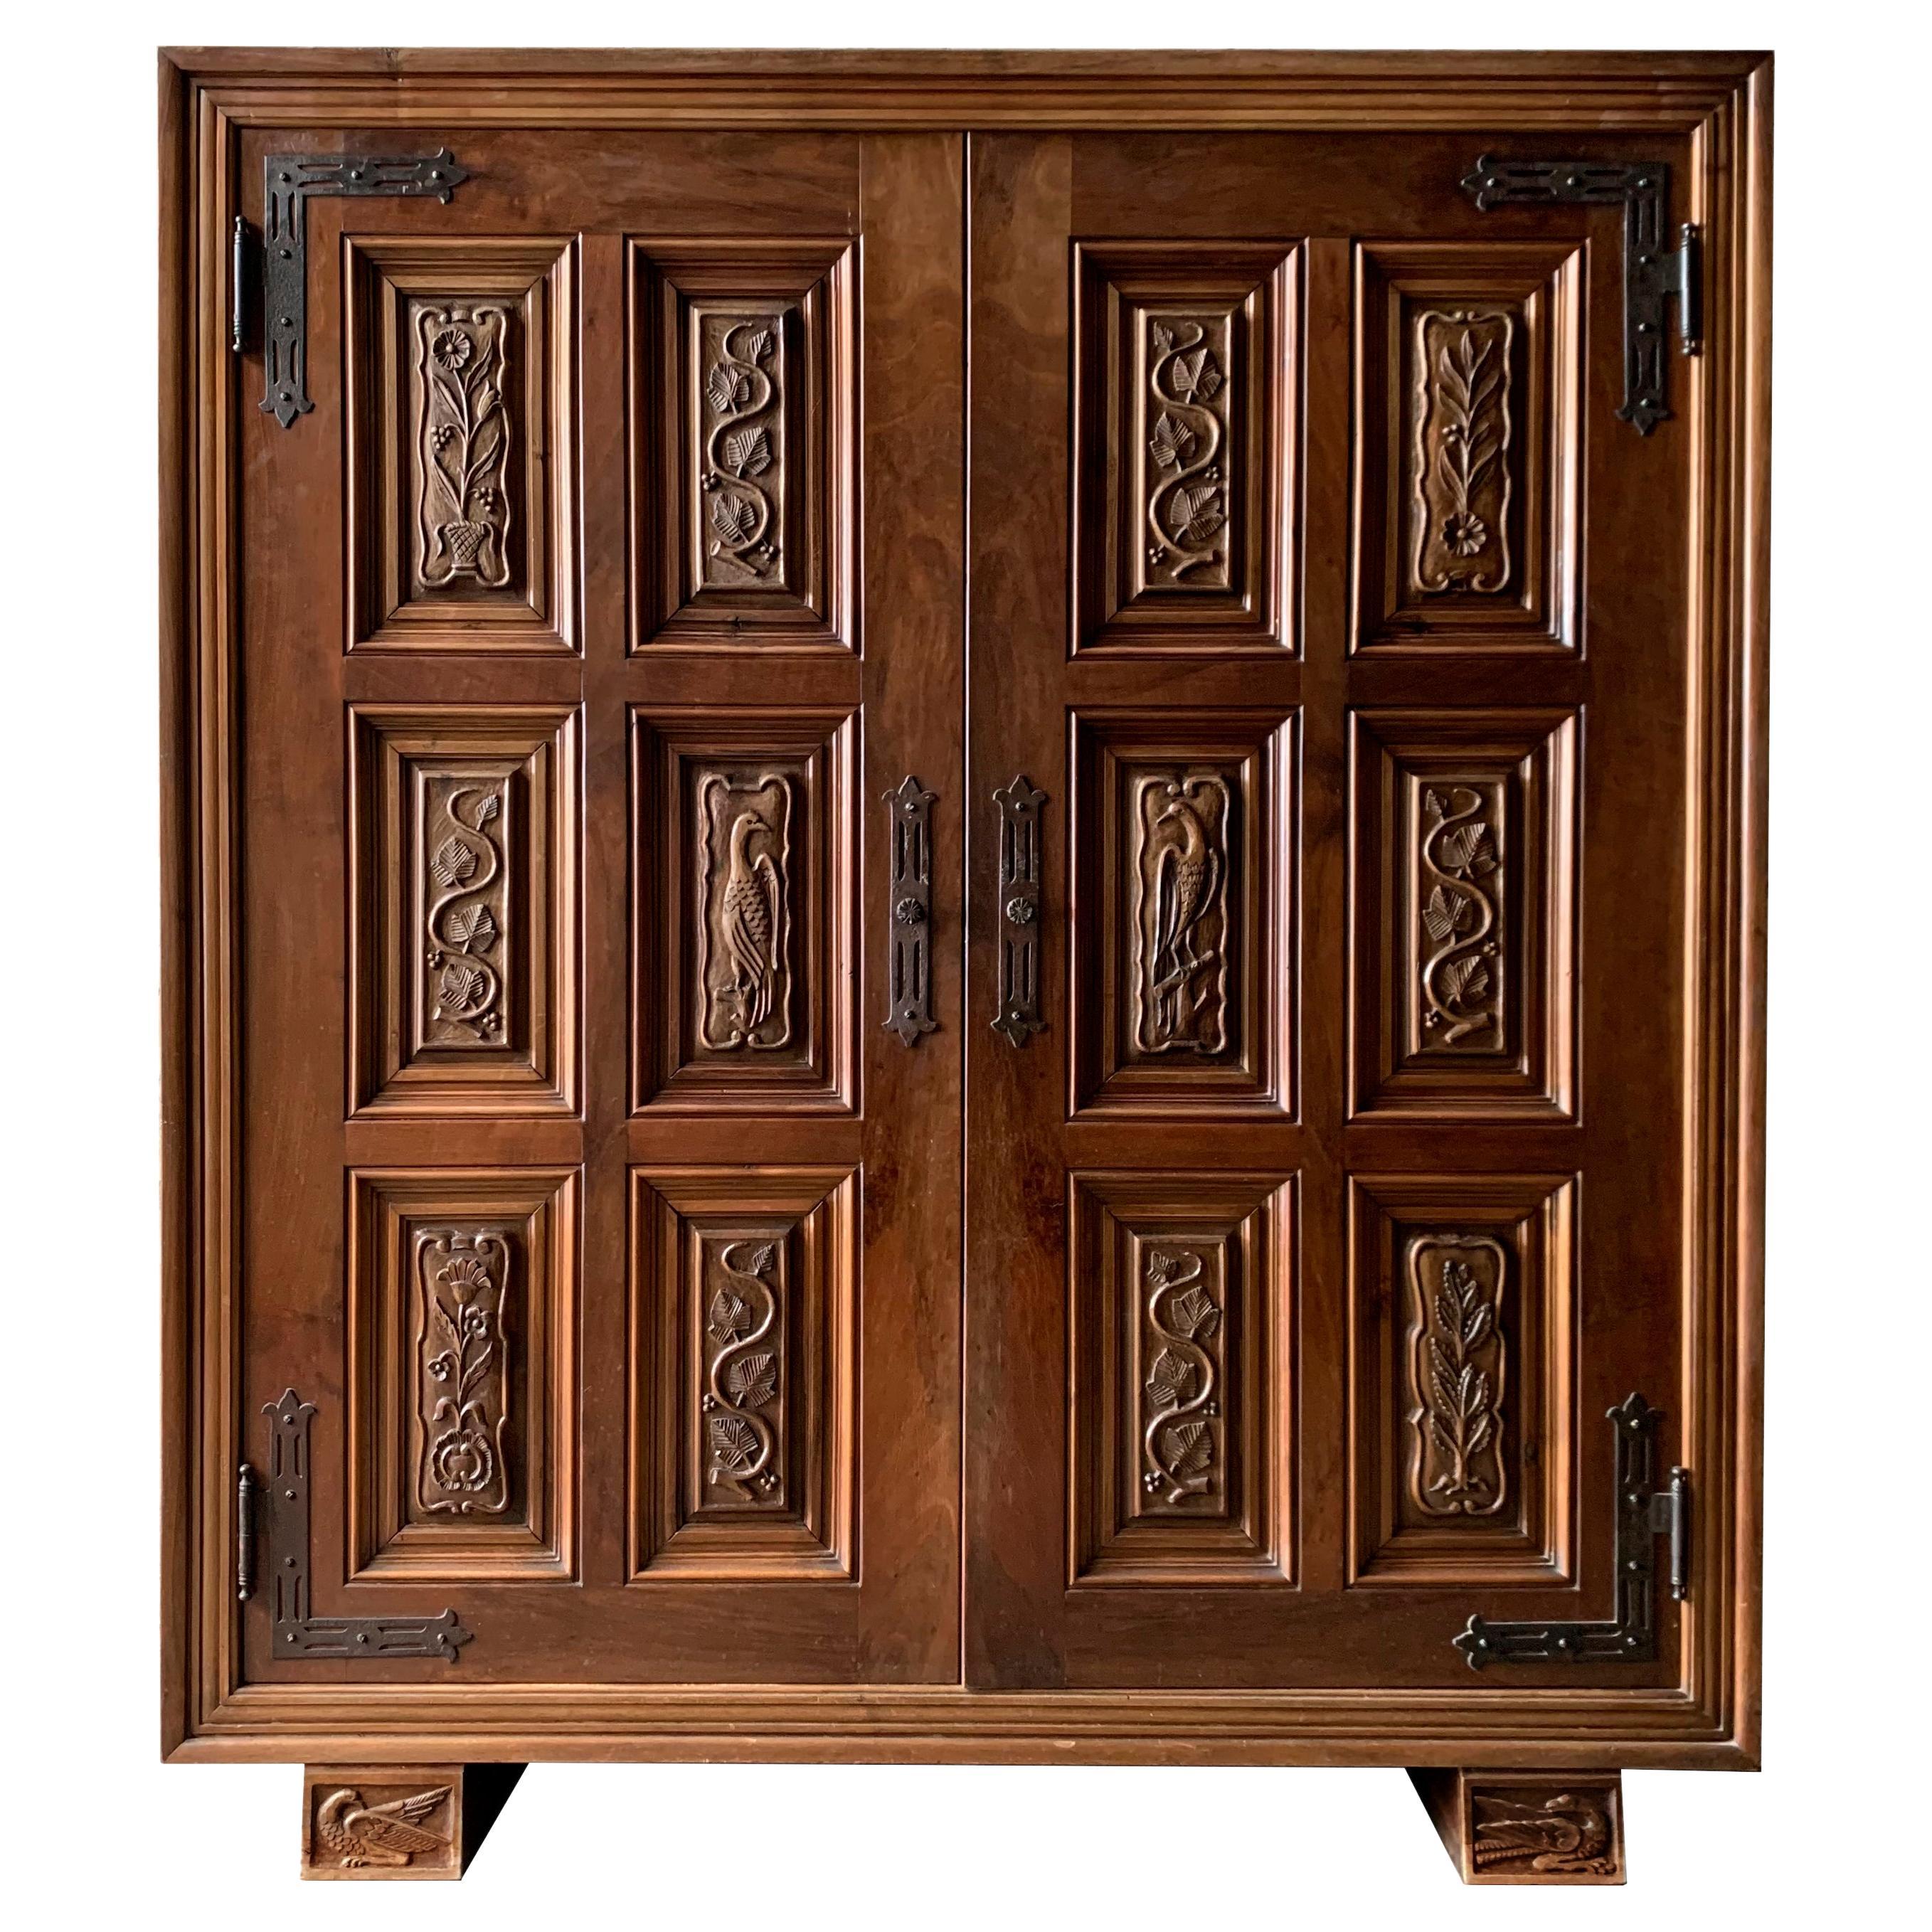 Stunning Spanish Organicist-Style Entry Closet from the 1940s